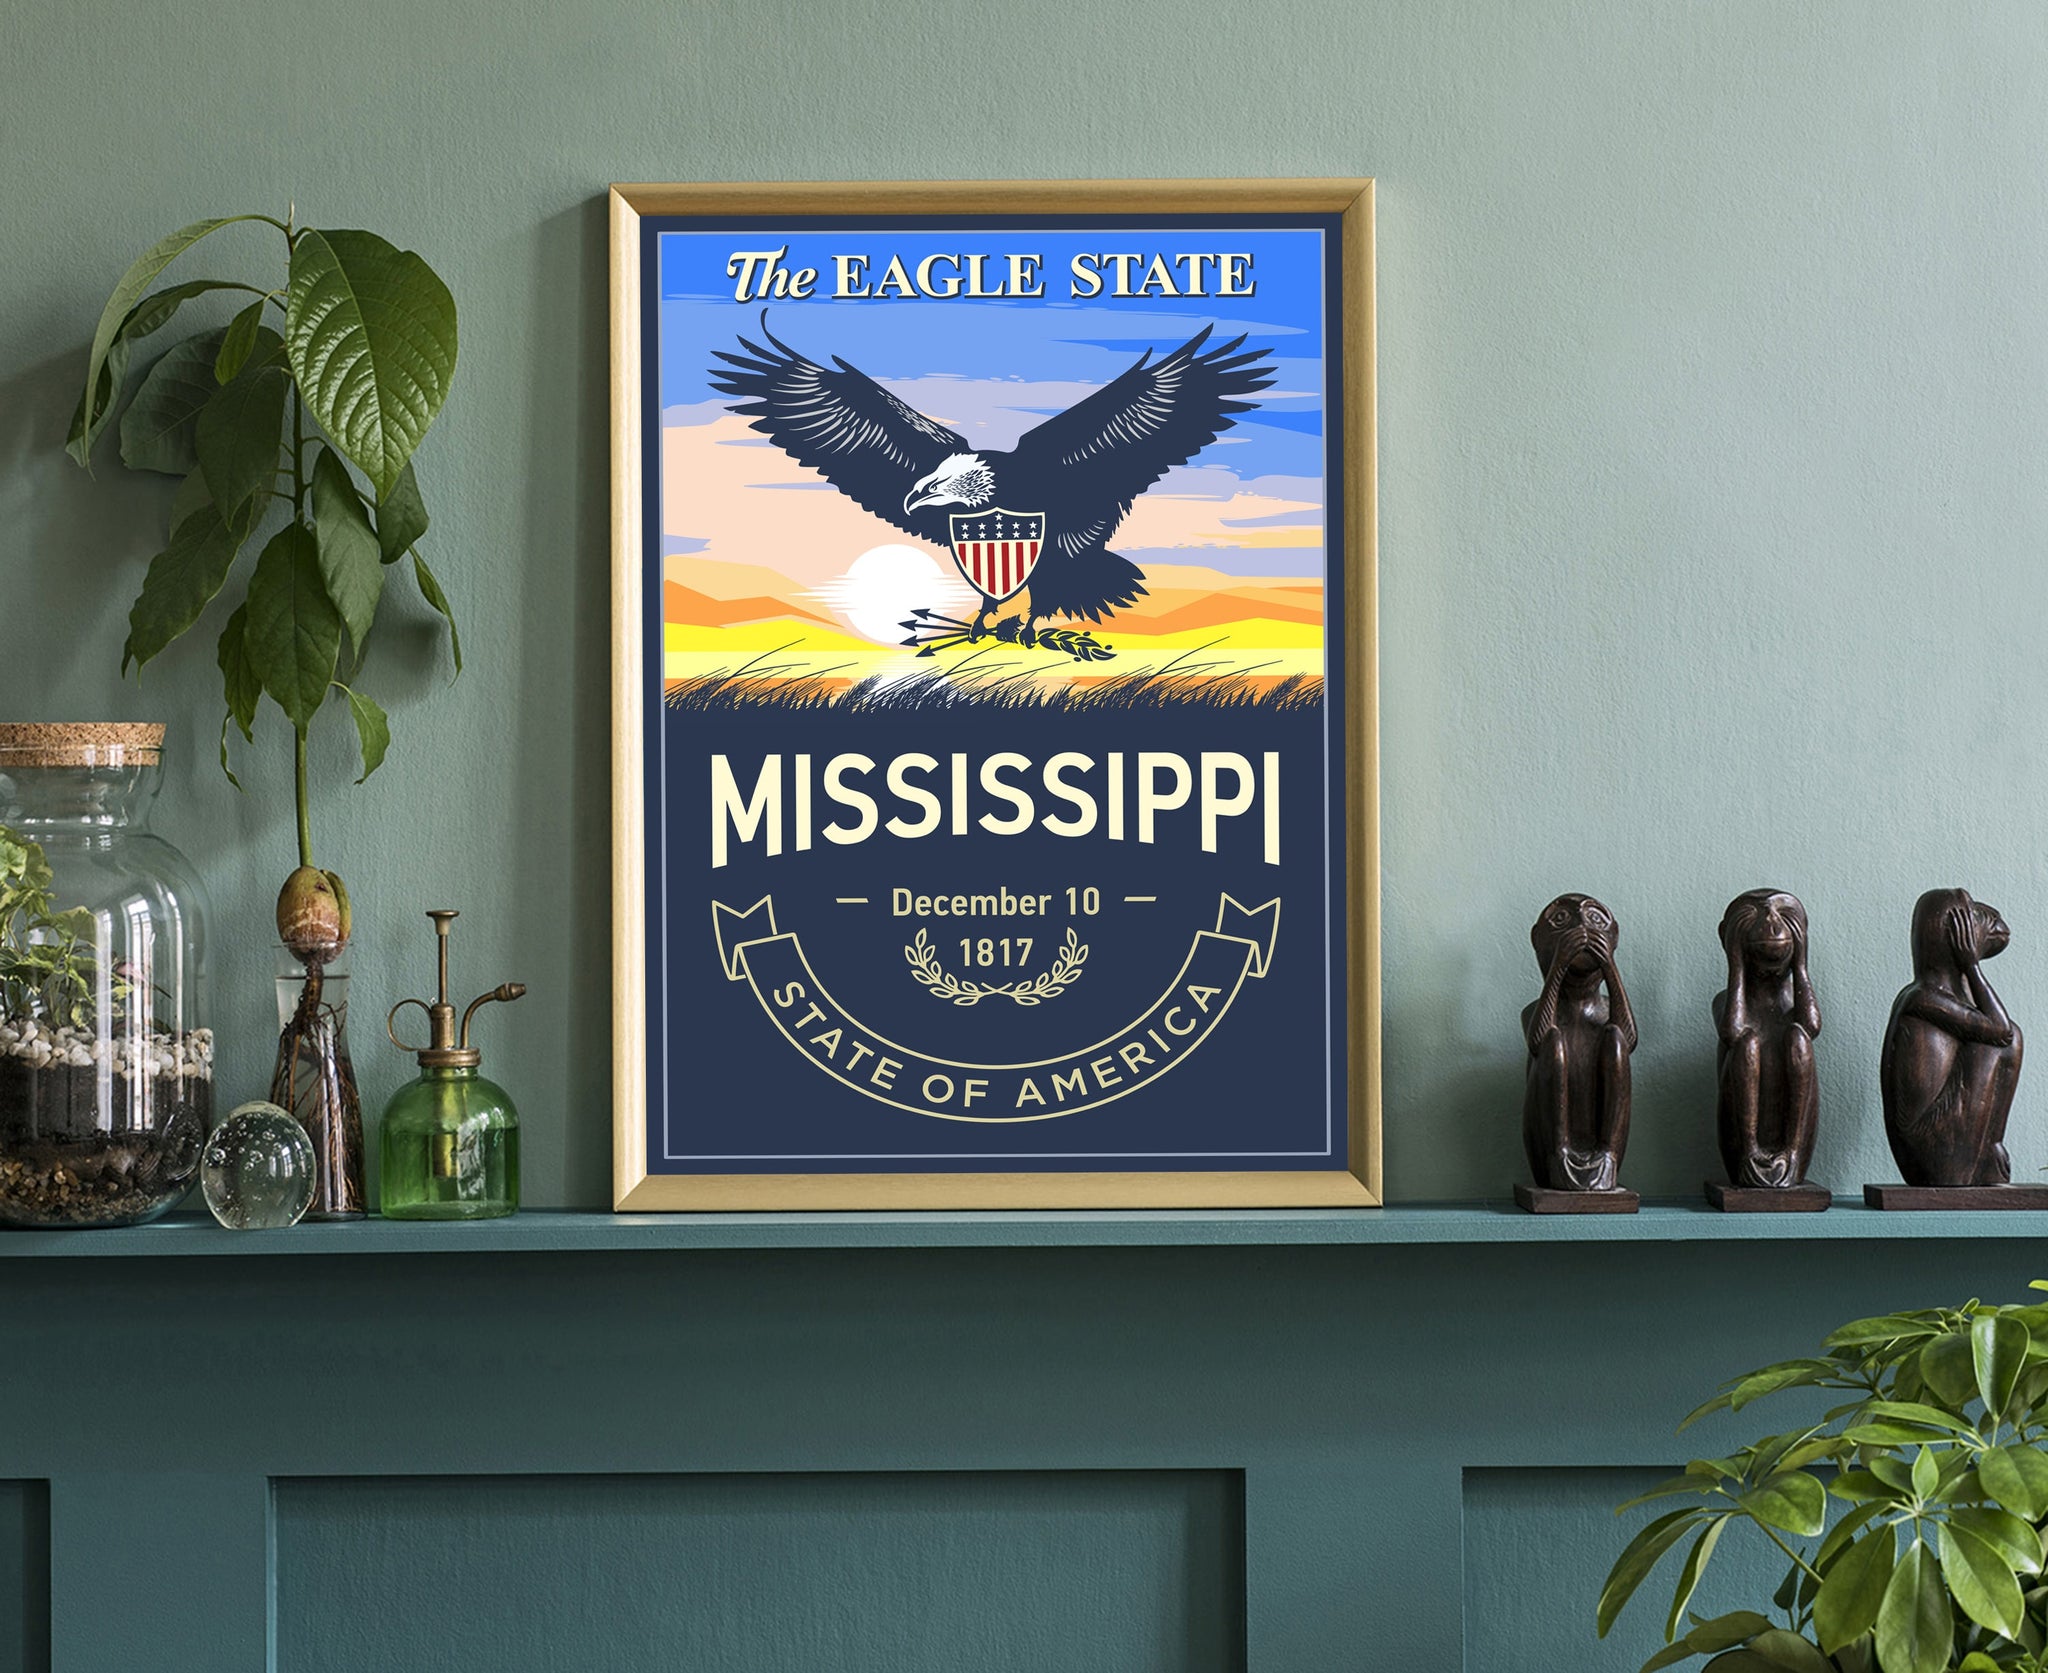 United States Poster, Mississippi State Poster Print, Mississippi State Emblem Poster, Retro Travel State Poster, Home and Office Wall Art